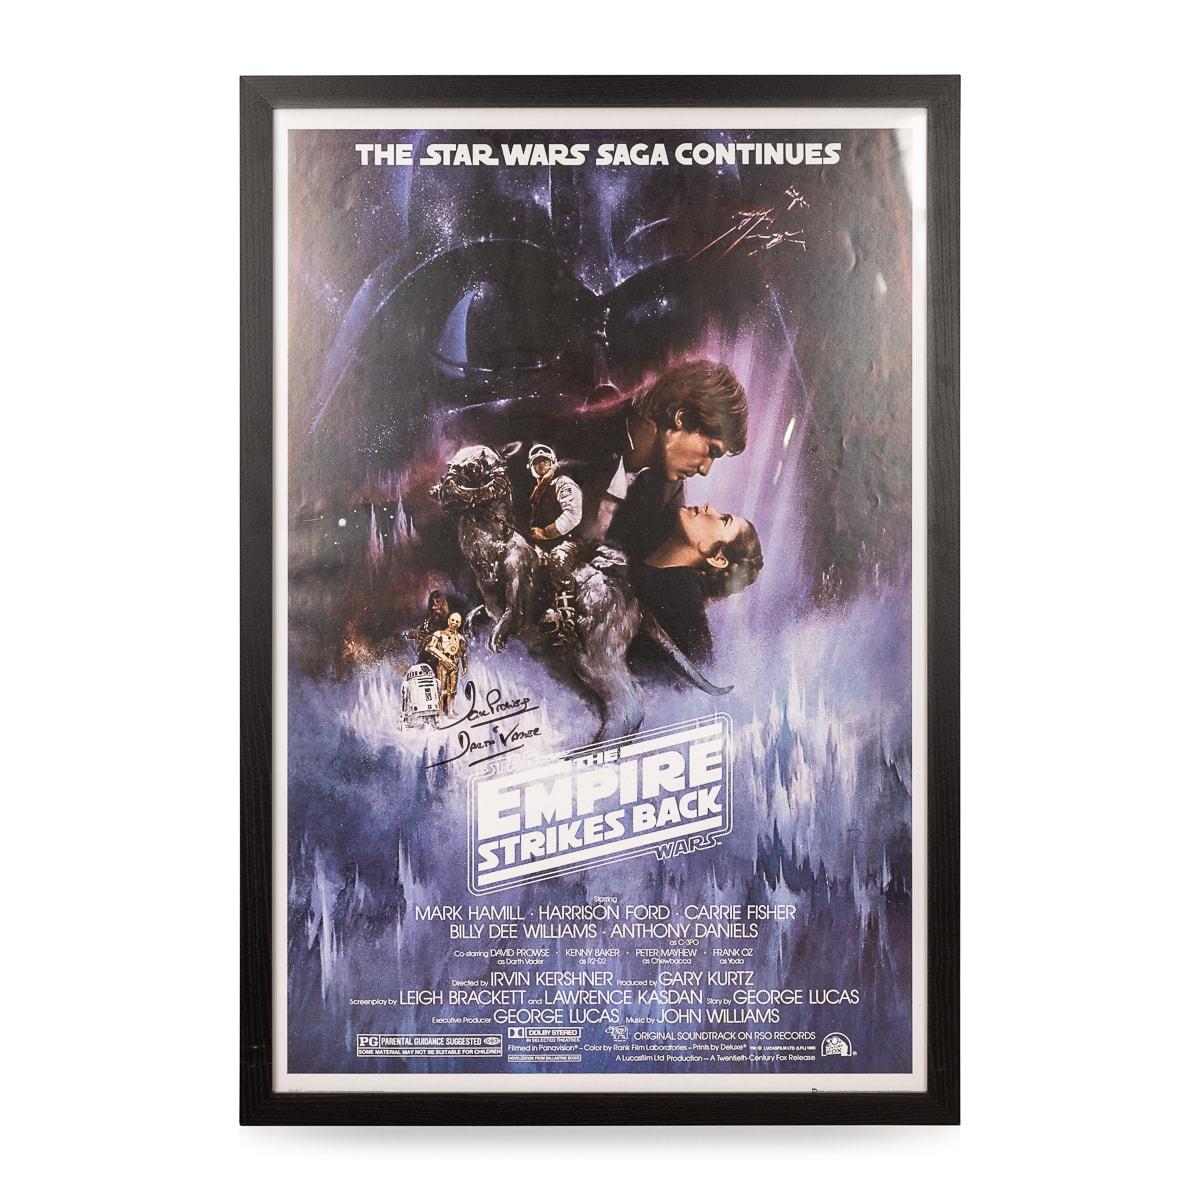 A set of three large framed posters, signed by Jack Prowse (DARTH VADER), from the blockbuster Star Wars, The Empire Strikes Back and The Return Of The Jedi, all with certificate of authenticity by Danbury Mint.

CONDITION
In Great Condition - Wear